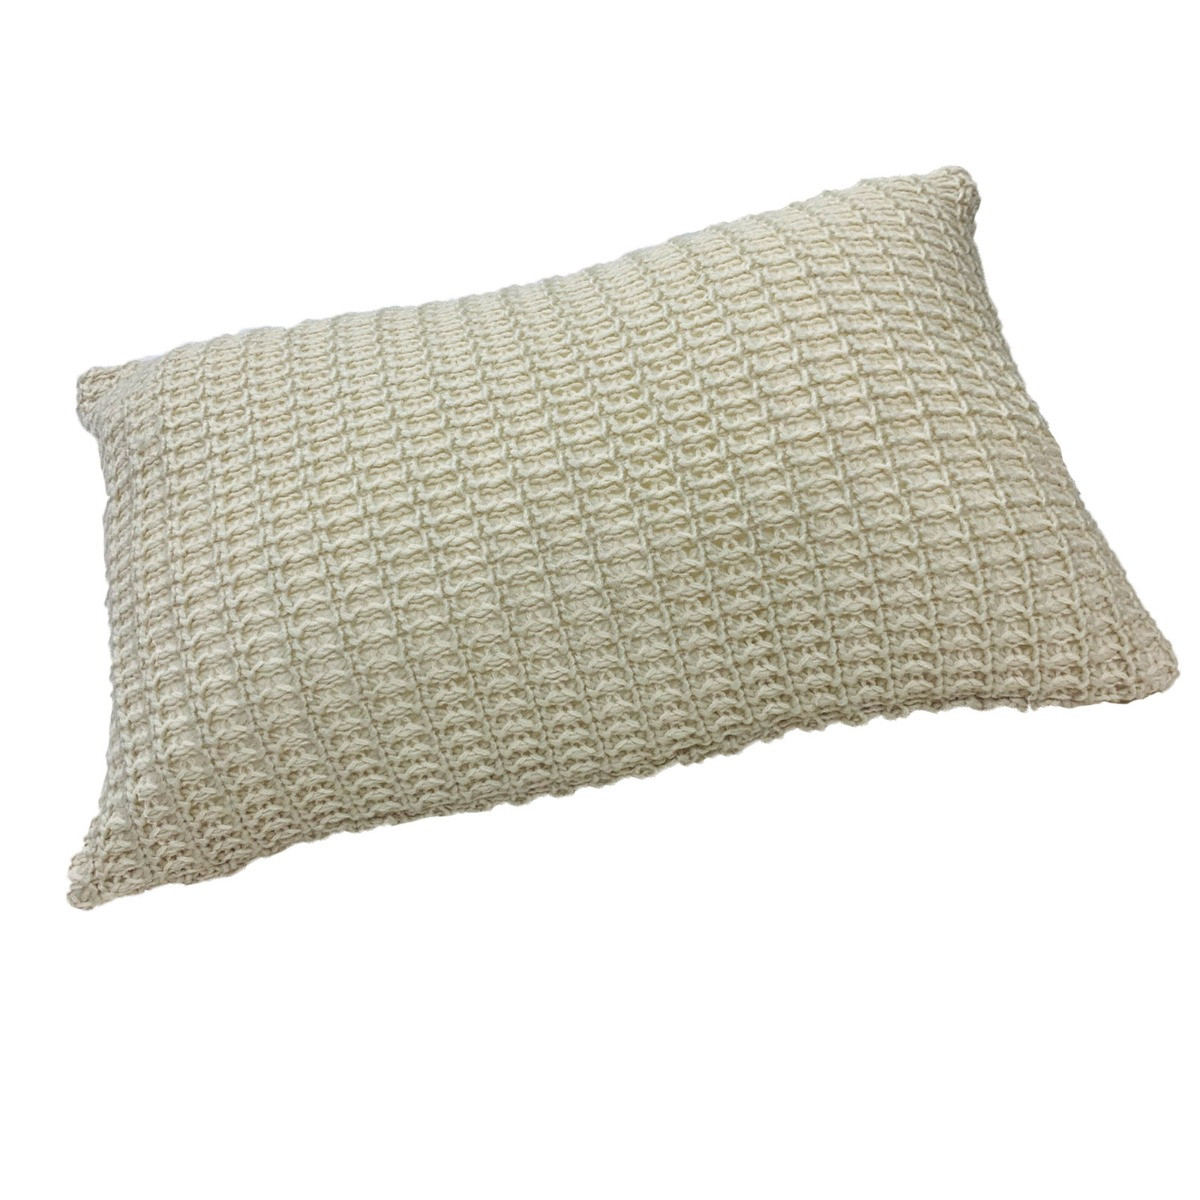 Dreamscene Soft Knitted Cushion Cover 30x45cm Unfilled - Biscuit>